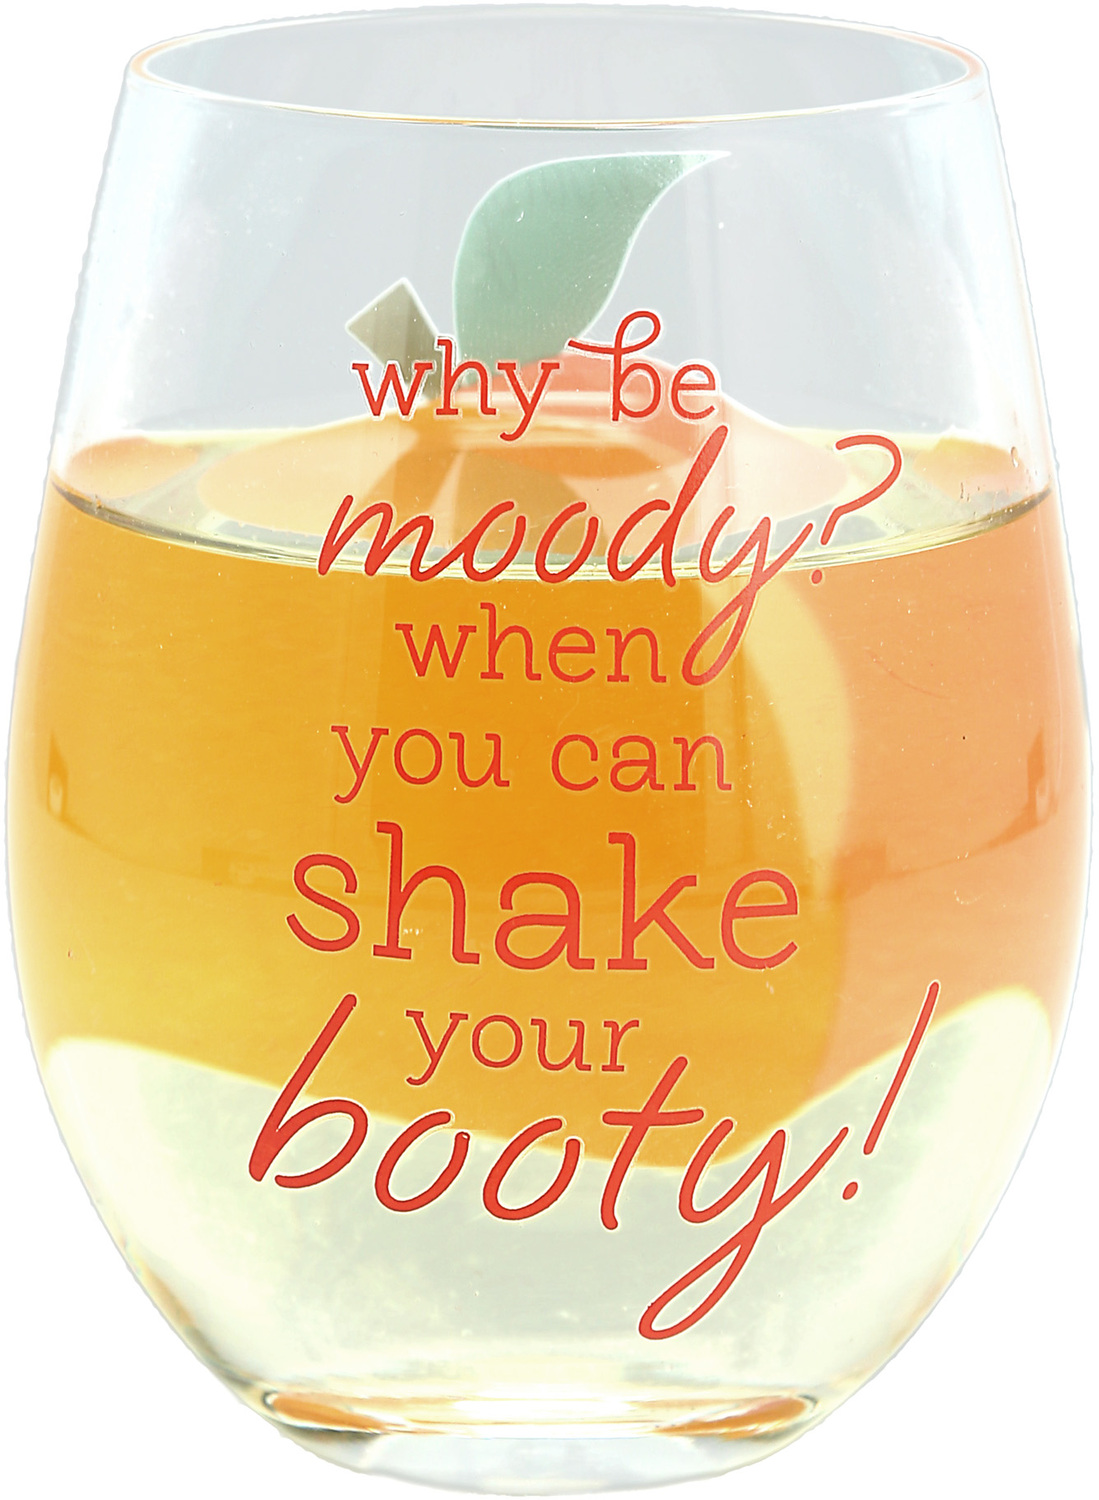 Shake Your Booty by Livin' on the Wedge - Shake Your Booty - 18 oz Stemless Wine Glass